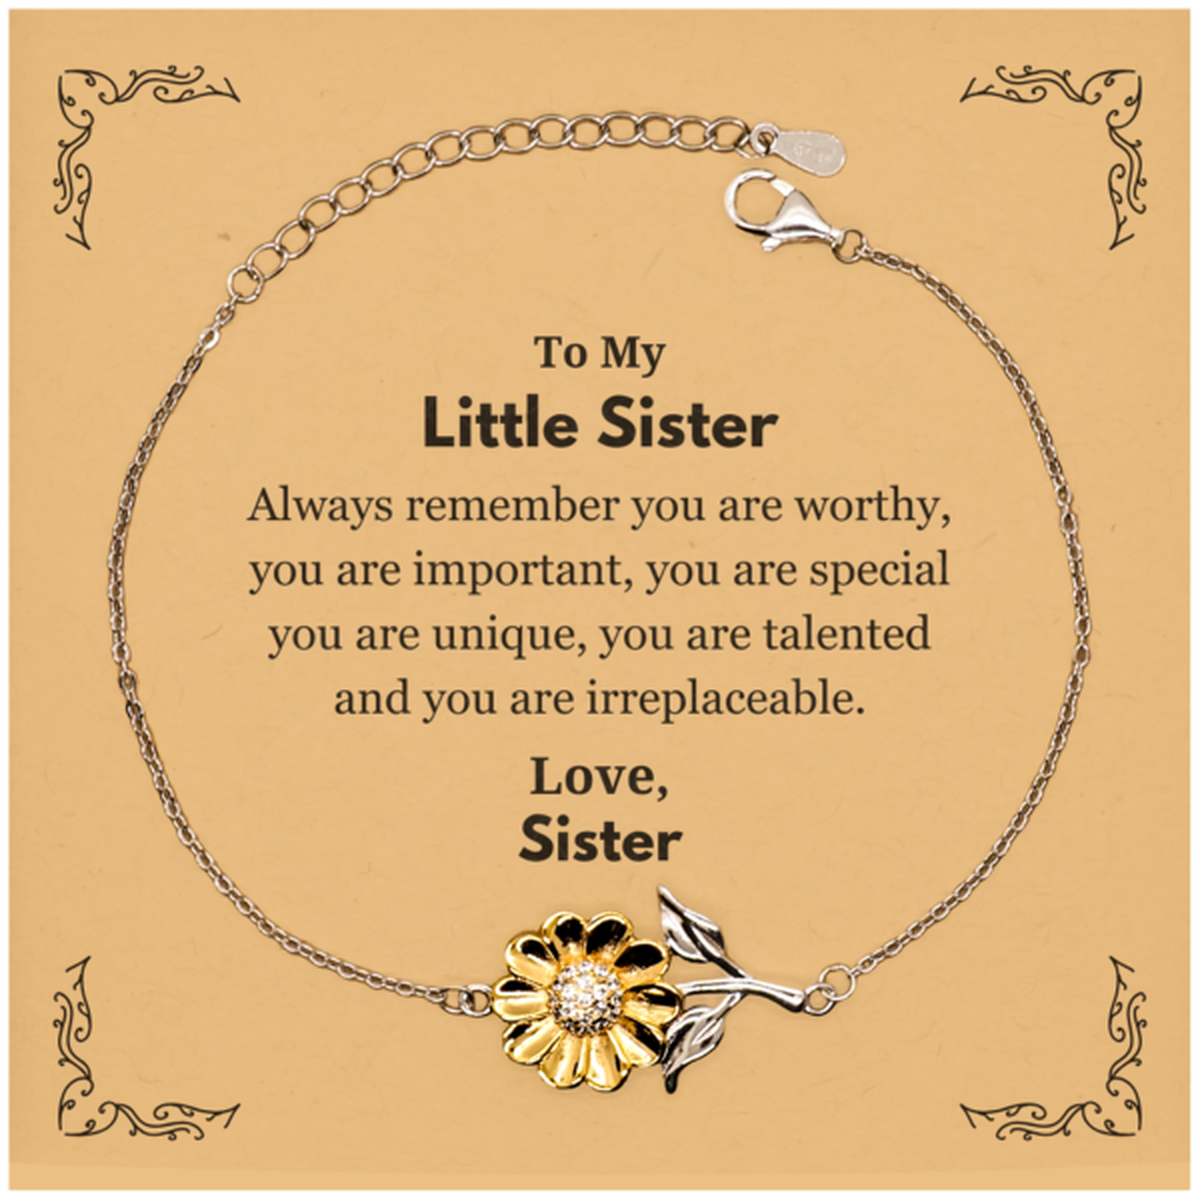 Little Sister Birthday Gifts from Sister, Inspirational Sunflower Bracelet for Little Sister Christmas Graduation Gifts for Little Sister Always remember you are worthy, you are important. Love, Sister